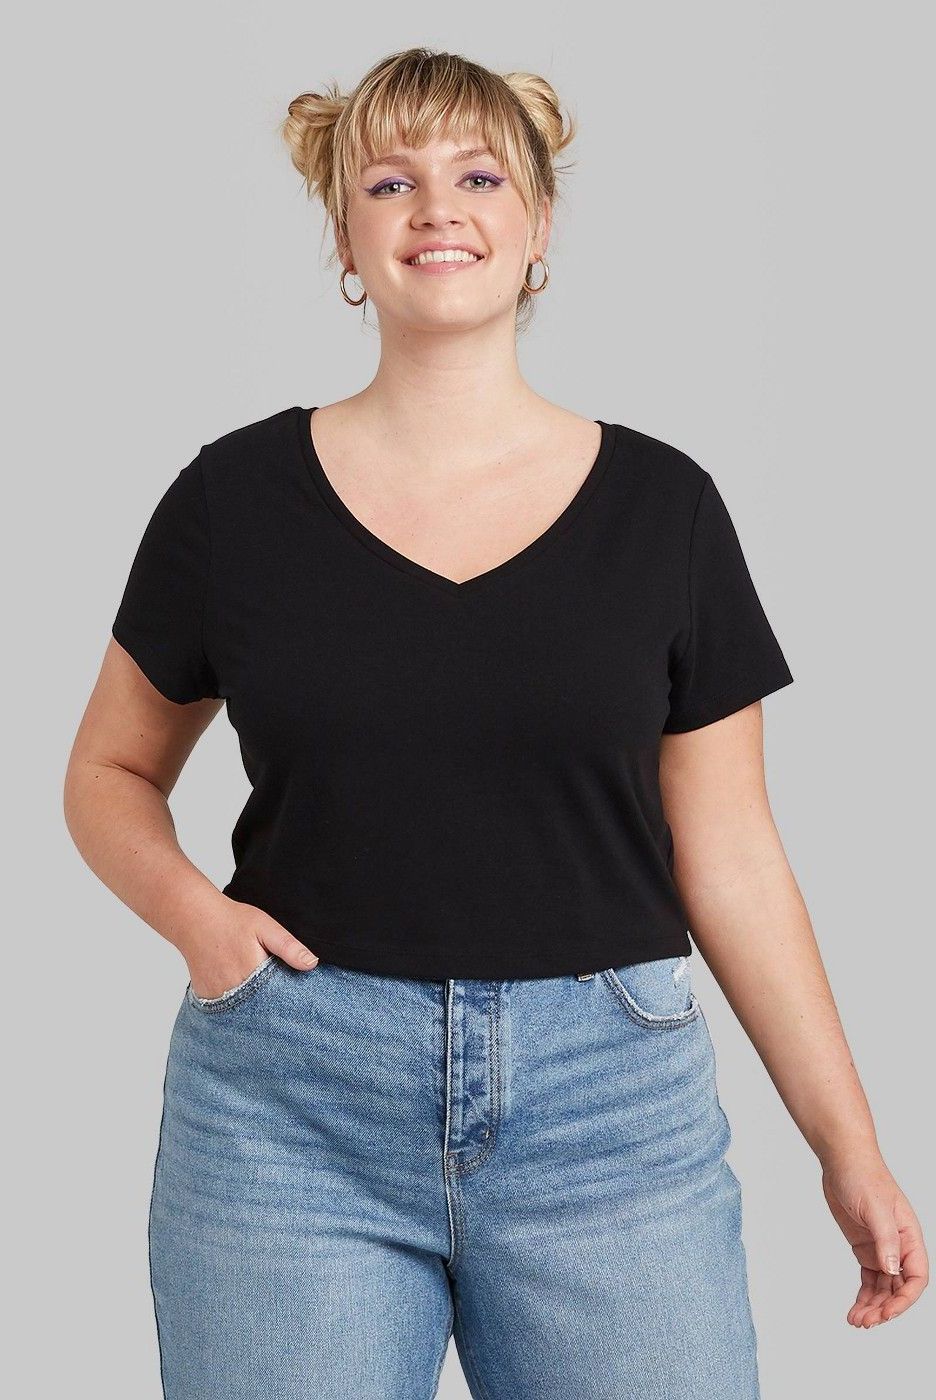 19 Best V-Neck T-Shirts for Women in 2023